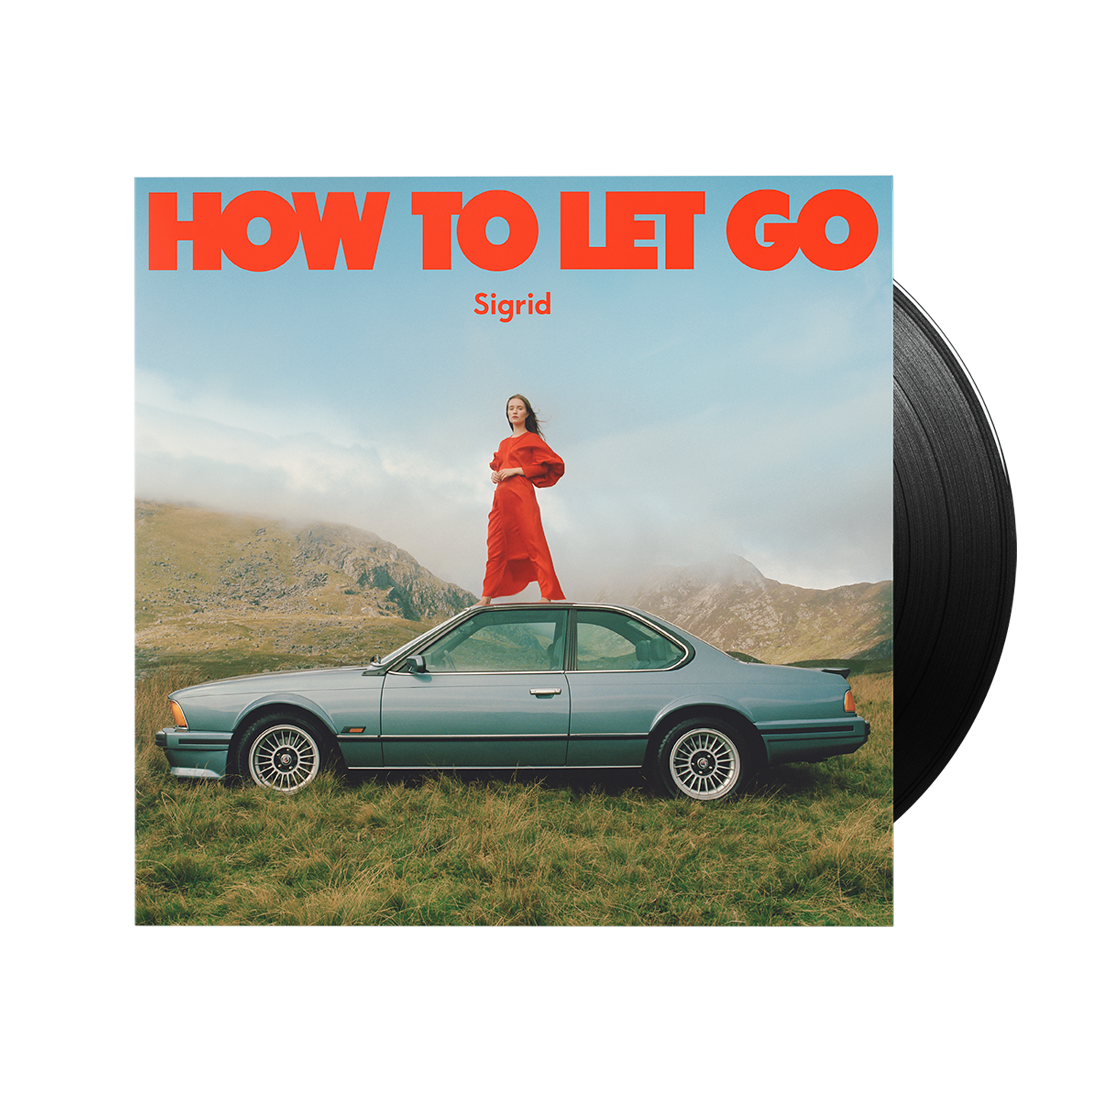 How To Let Go: Vinyl LP + Limited Signed Poster